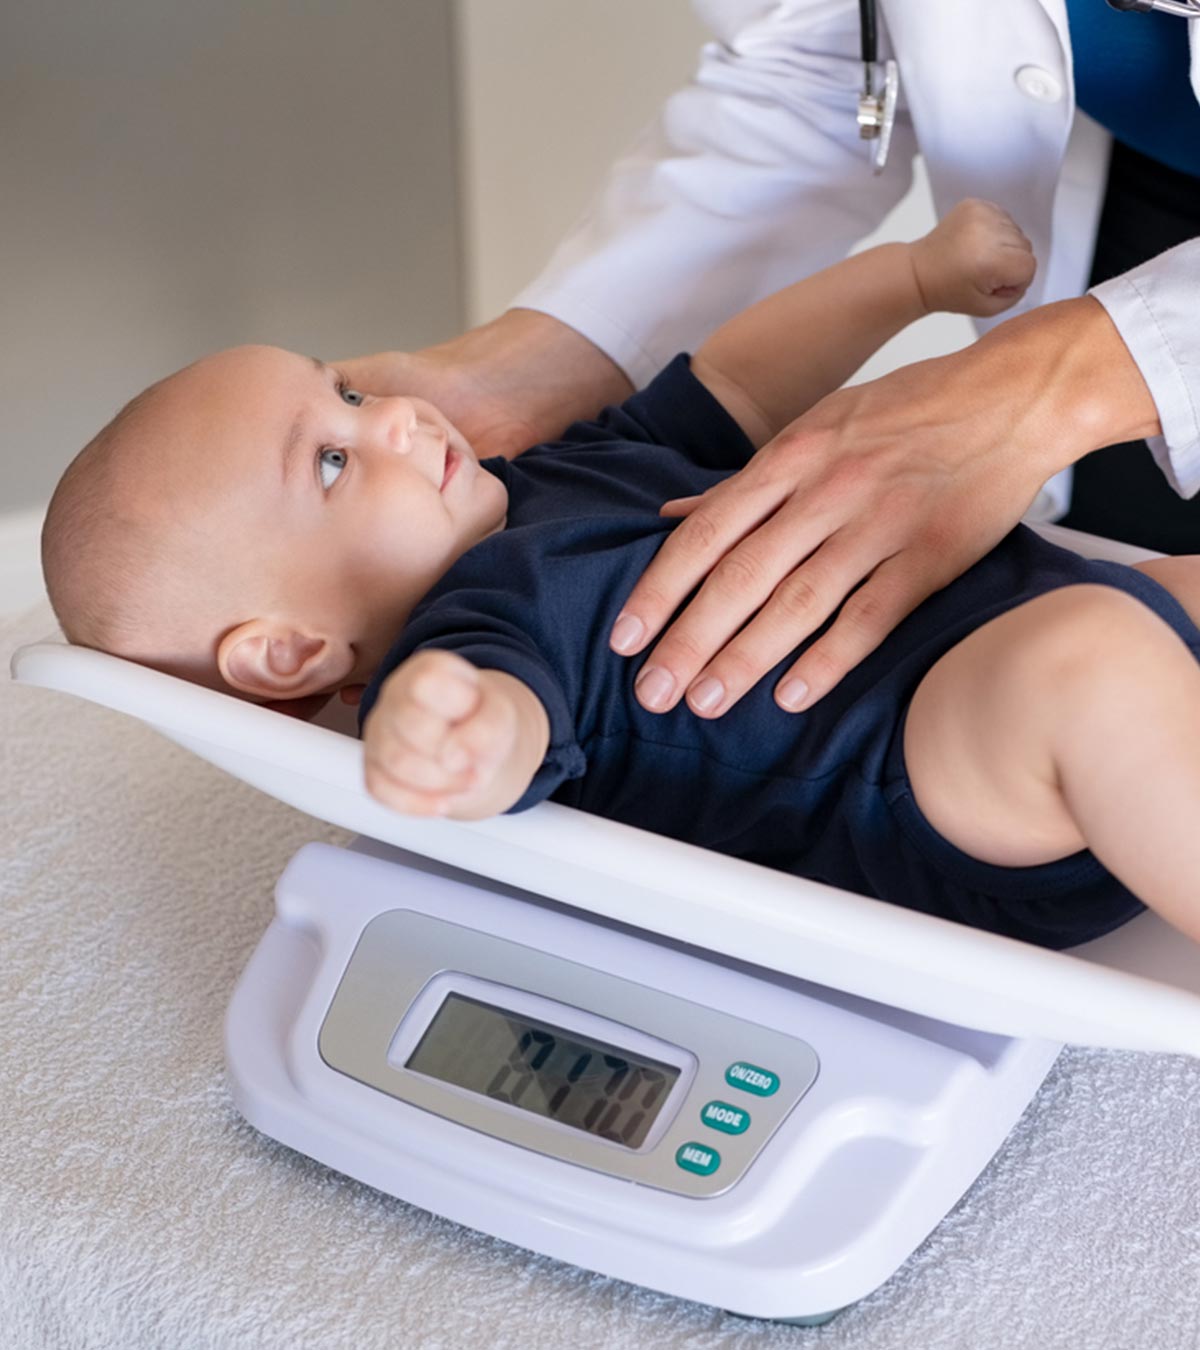 Baby Not Gaining Weight: Reasons & 8 Tips To Help Them Gain